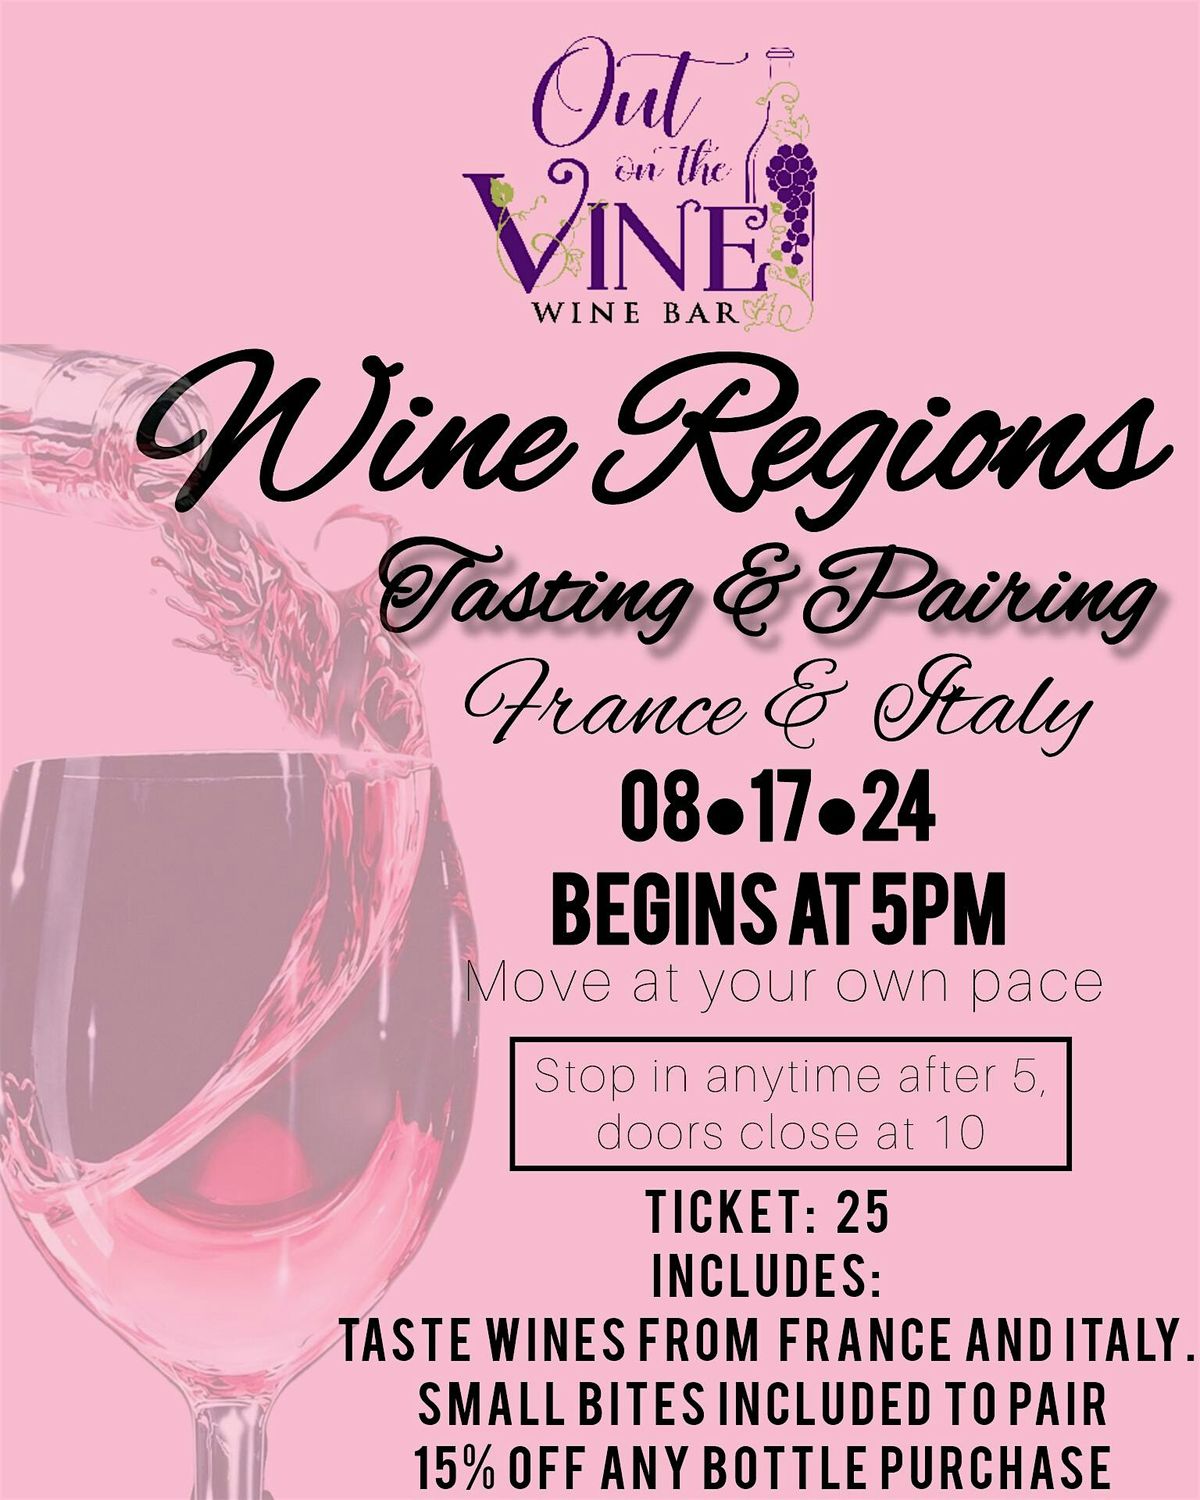 Wine Regions  Tasting & Pairing (France and Italy)